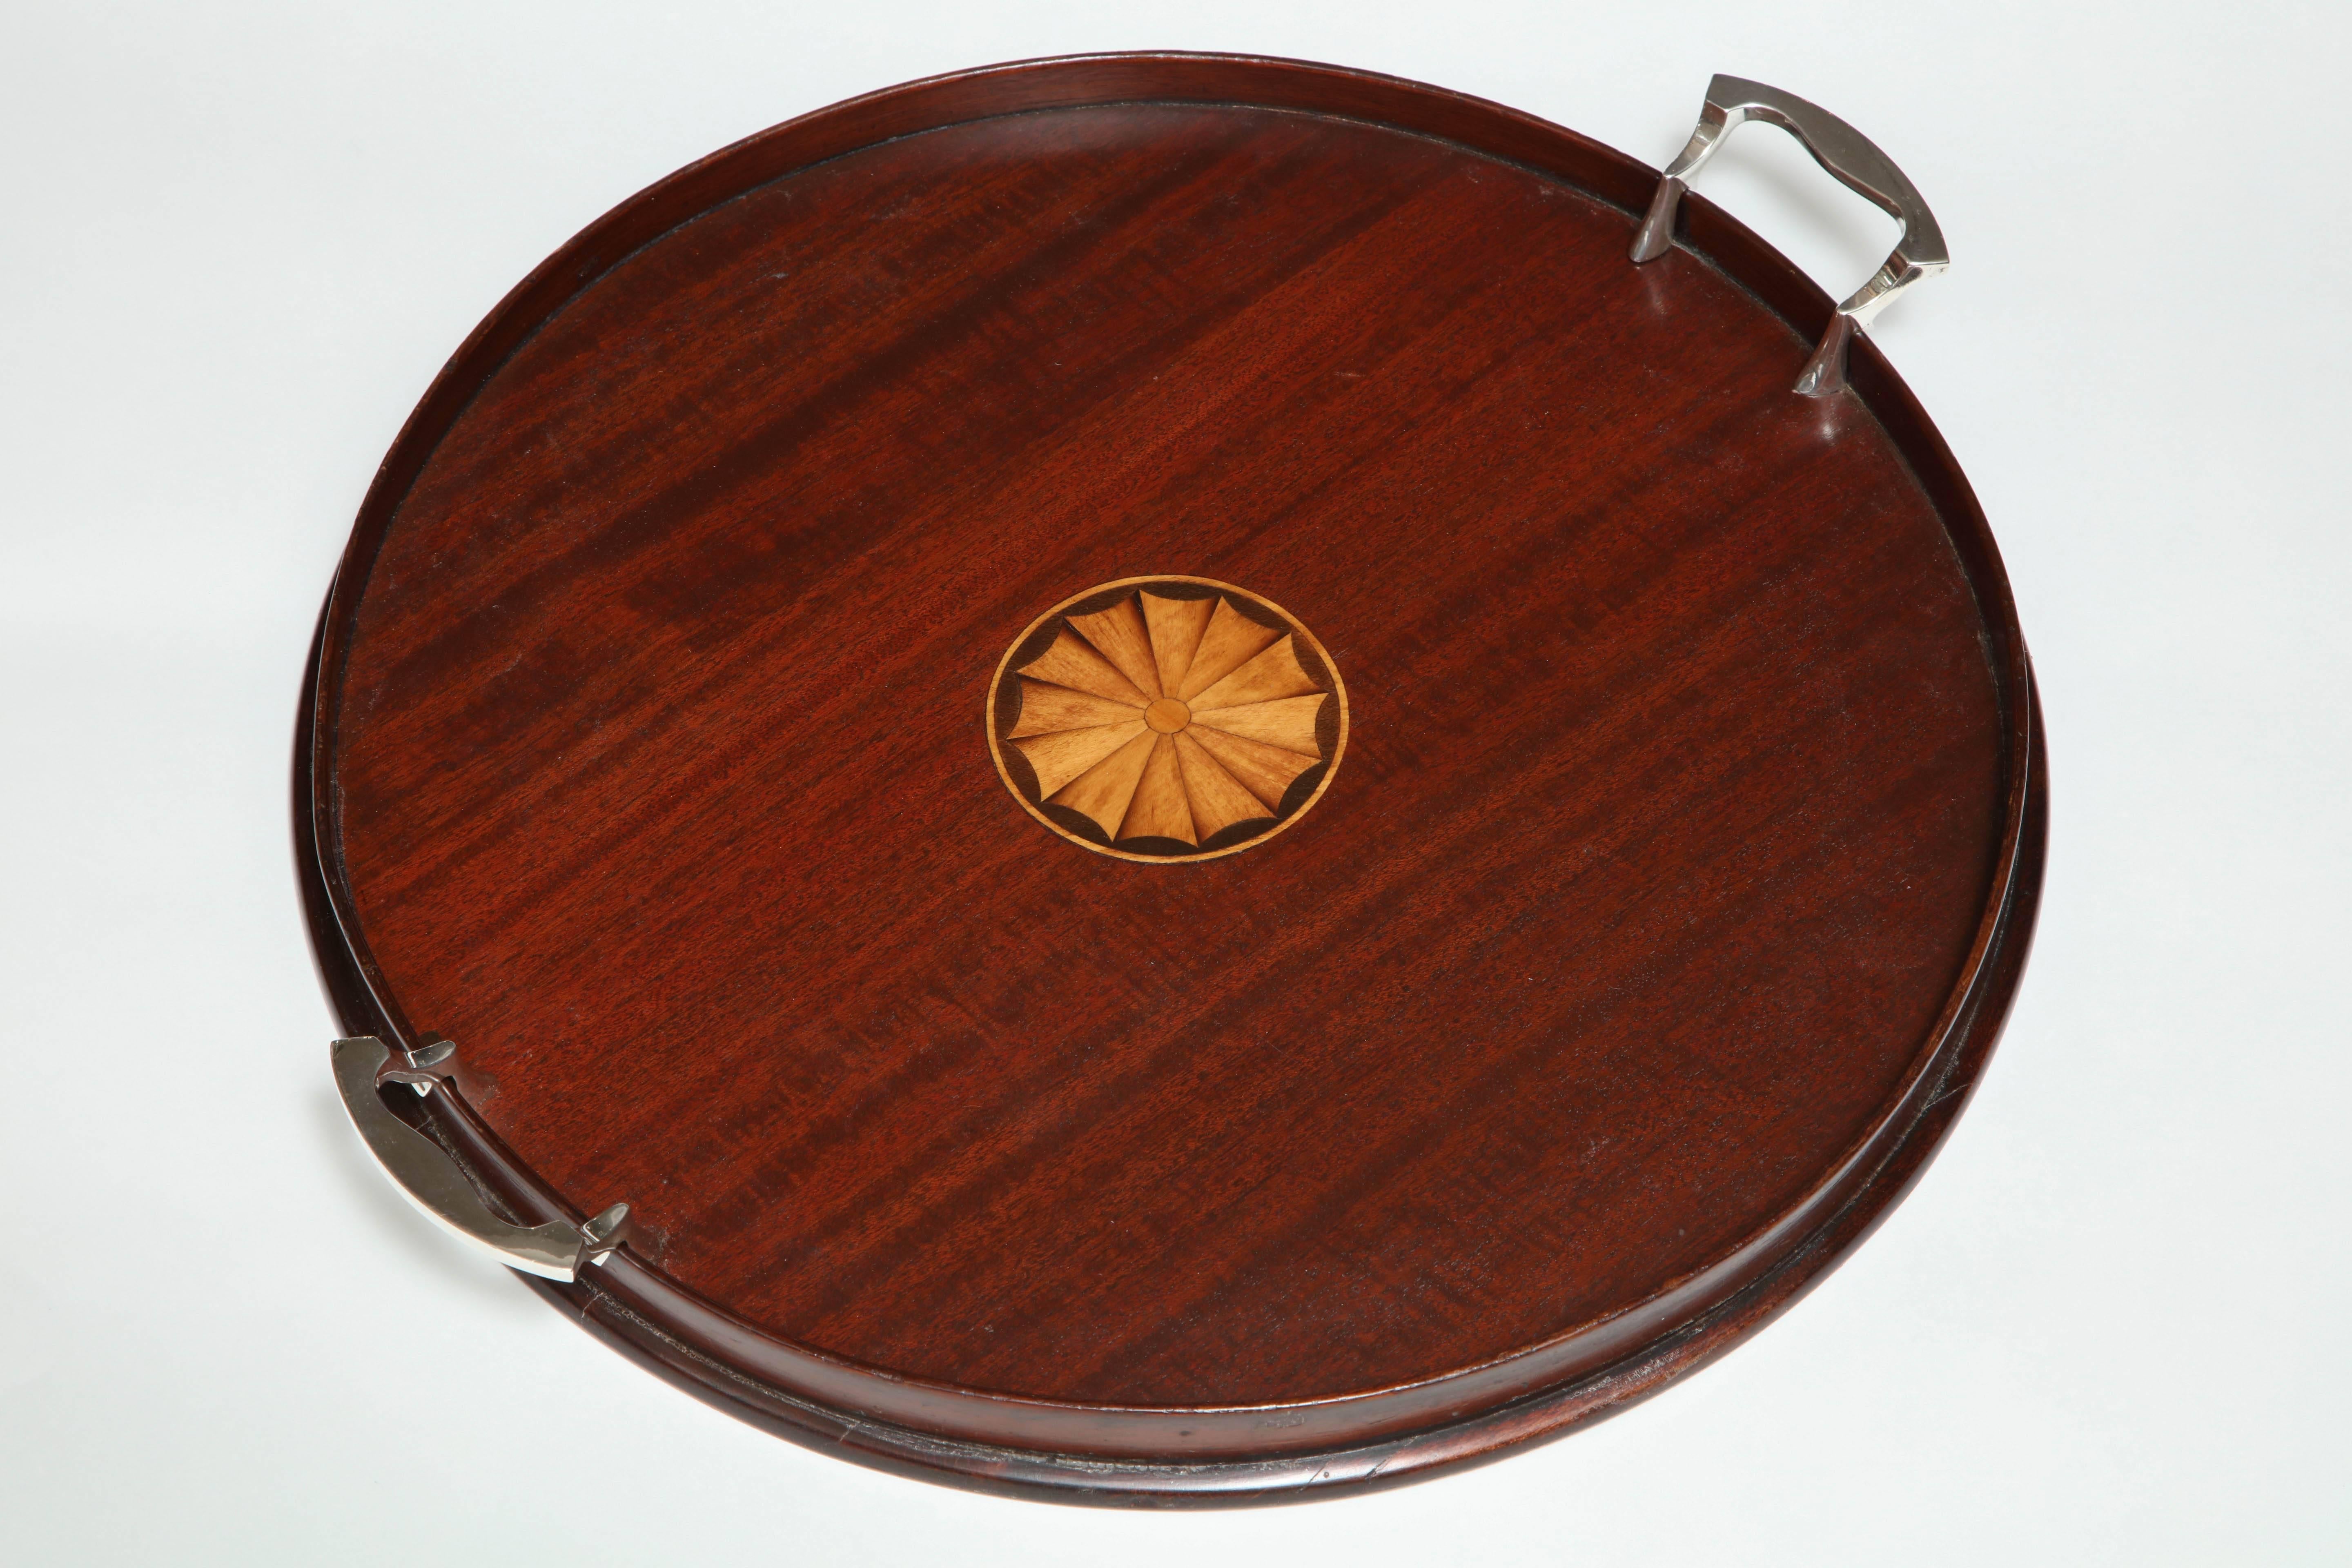 Edwardian, Sheraton-style, round wood serving tray with silver-plated handles, Manning, Bowman and Co., Meriden, CT., circa 1900. Measure: 16 1/8 inches in diameter x 18 1/2 inches wide (handle to handle) x 1 1/2 inches high. Lovely marquetry shell